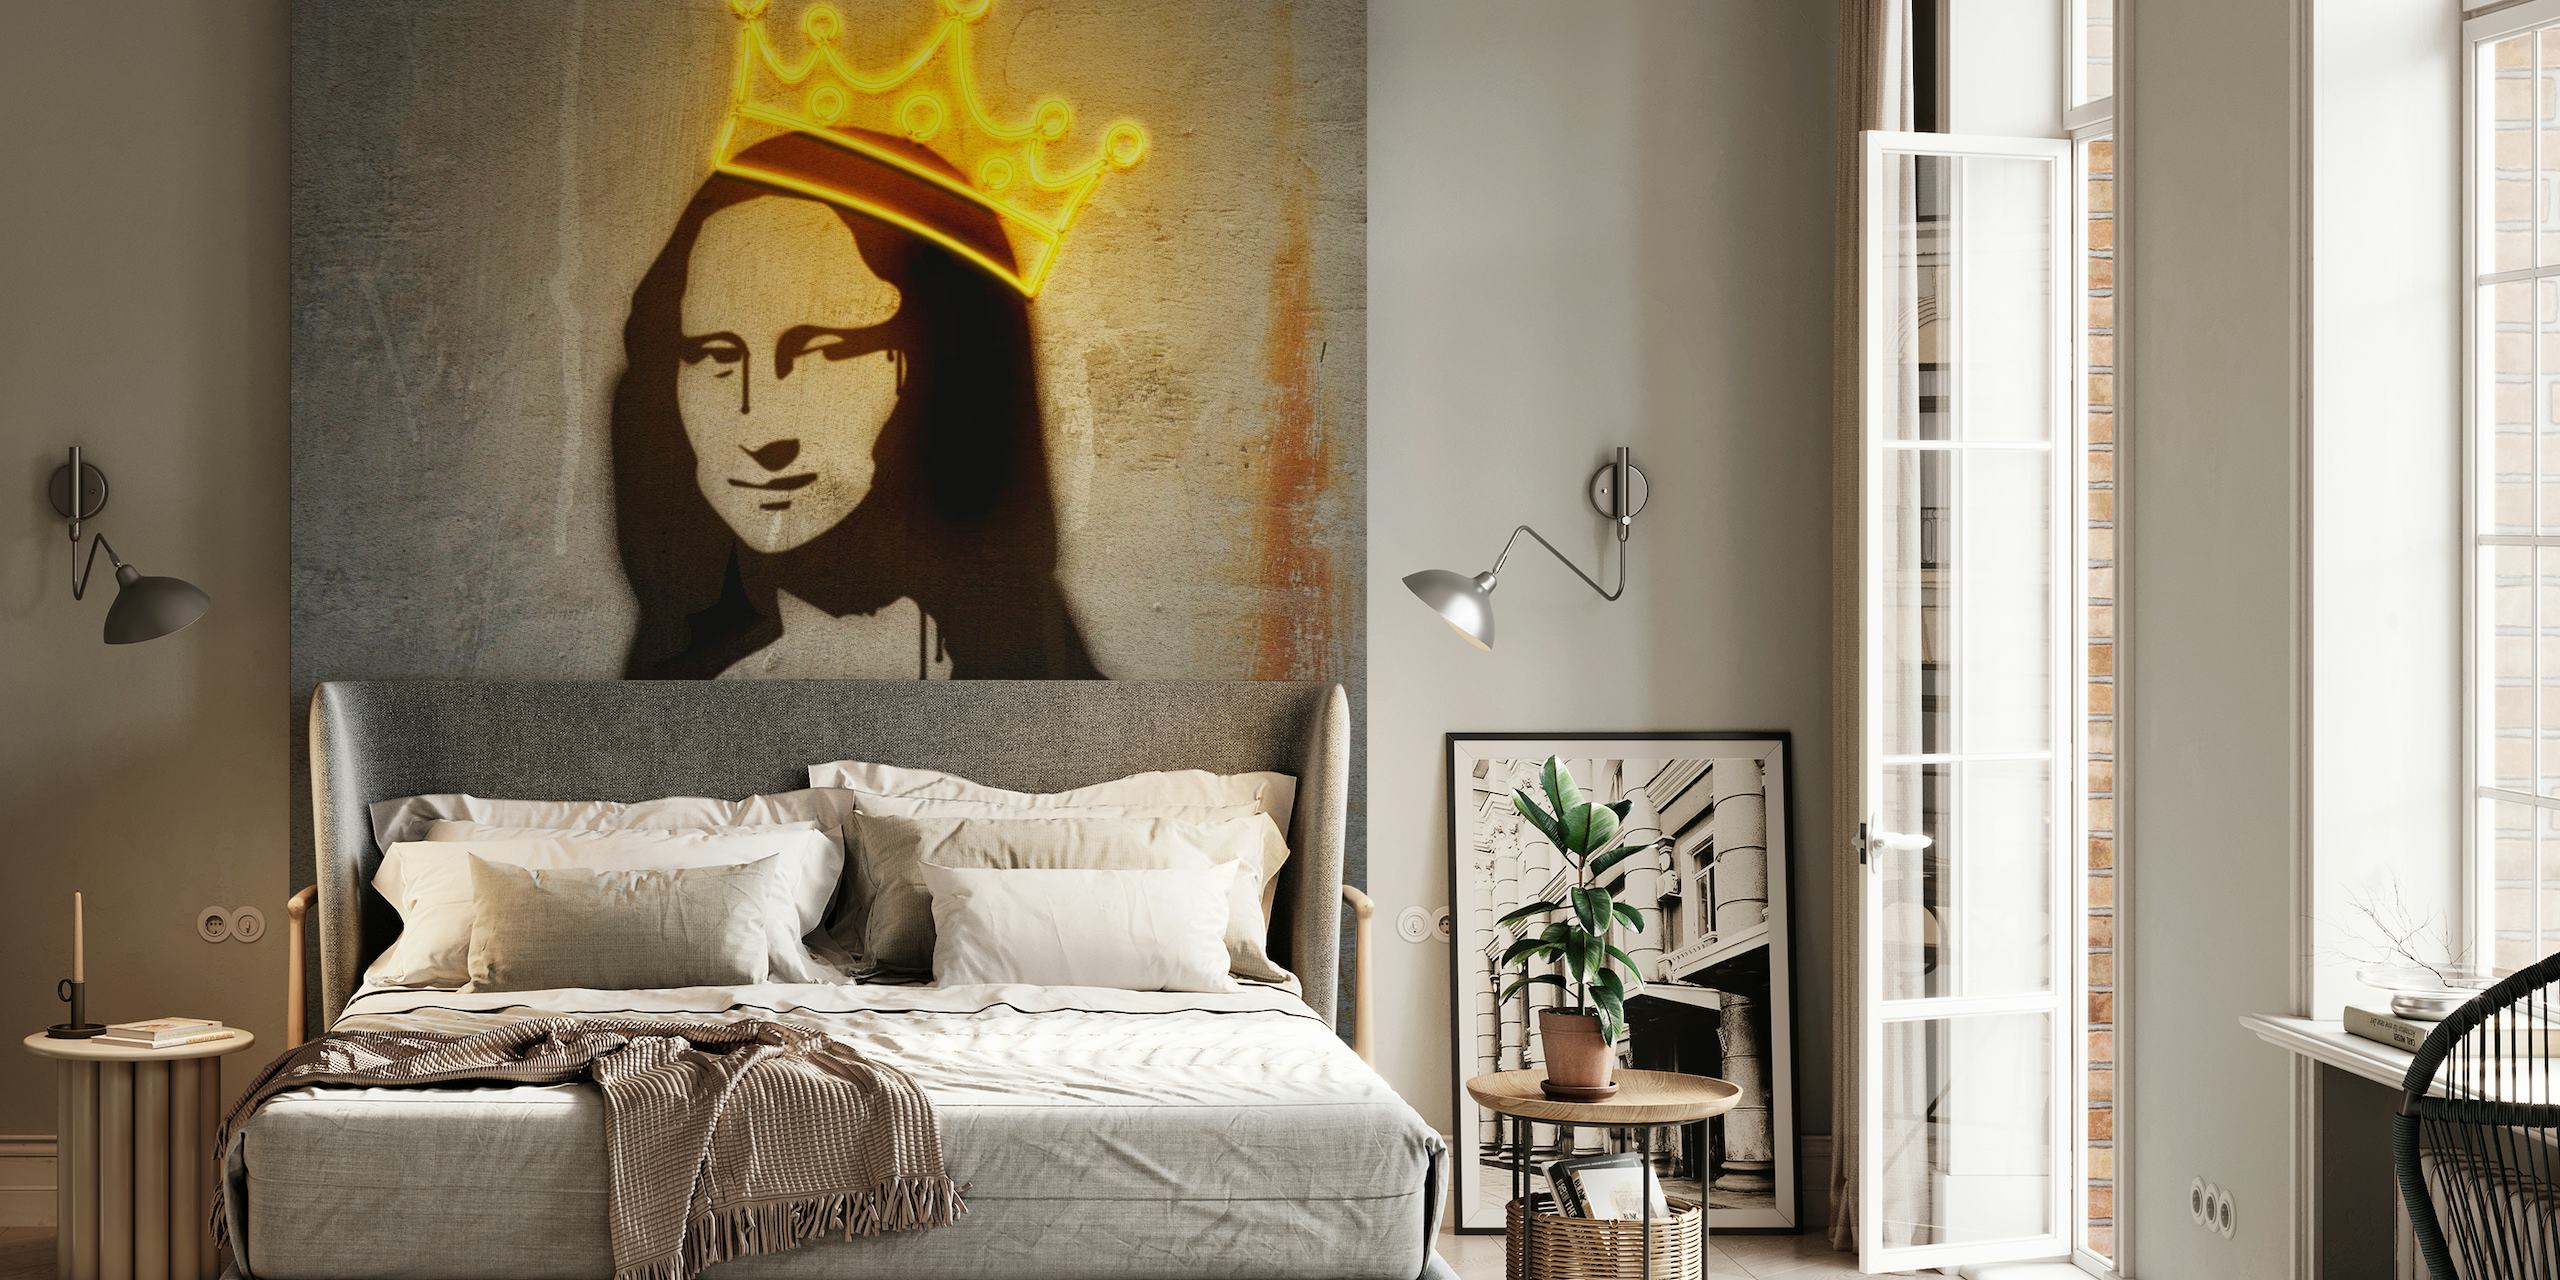 Monalisa with a neon crown wall mural